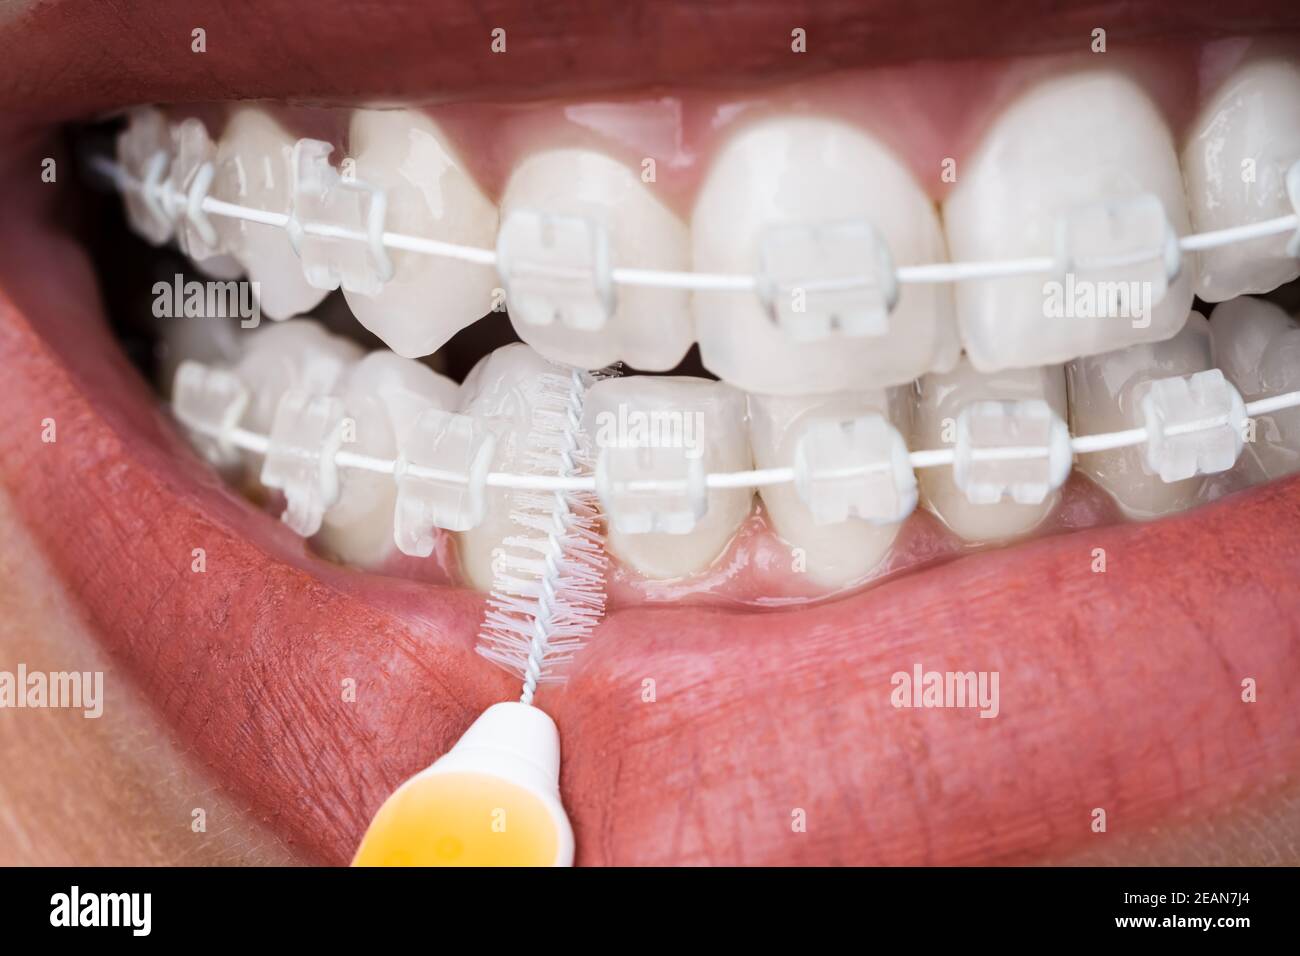 Female Cleaning Dental Brackets In Mouth Stock Photo